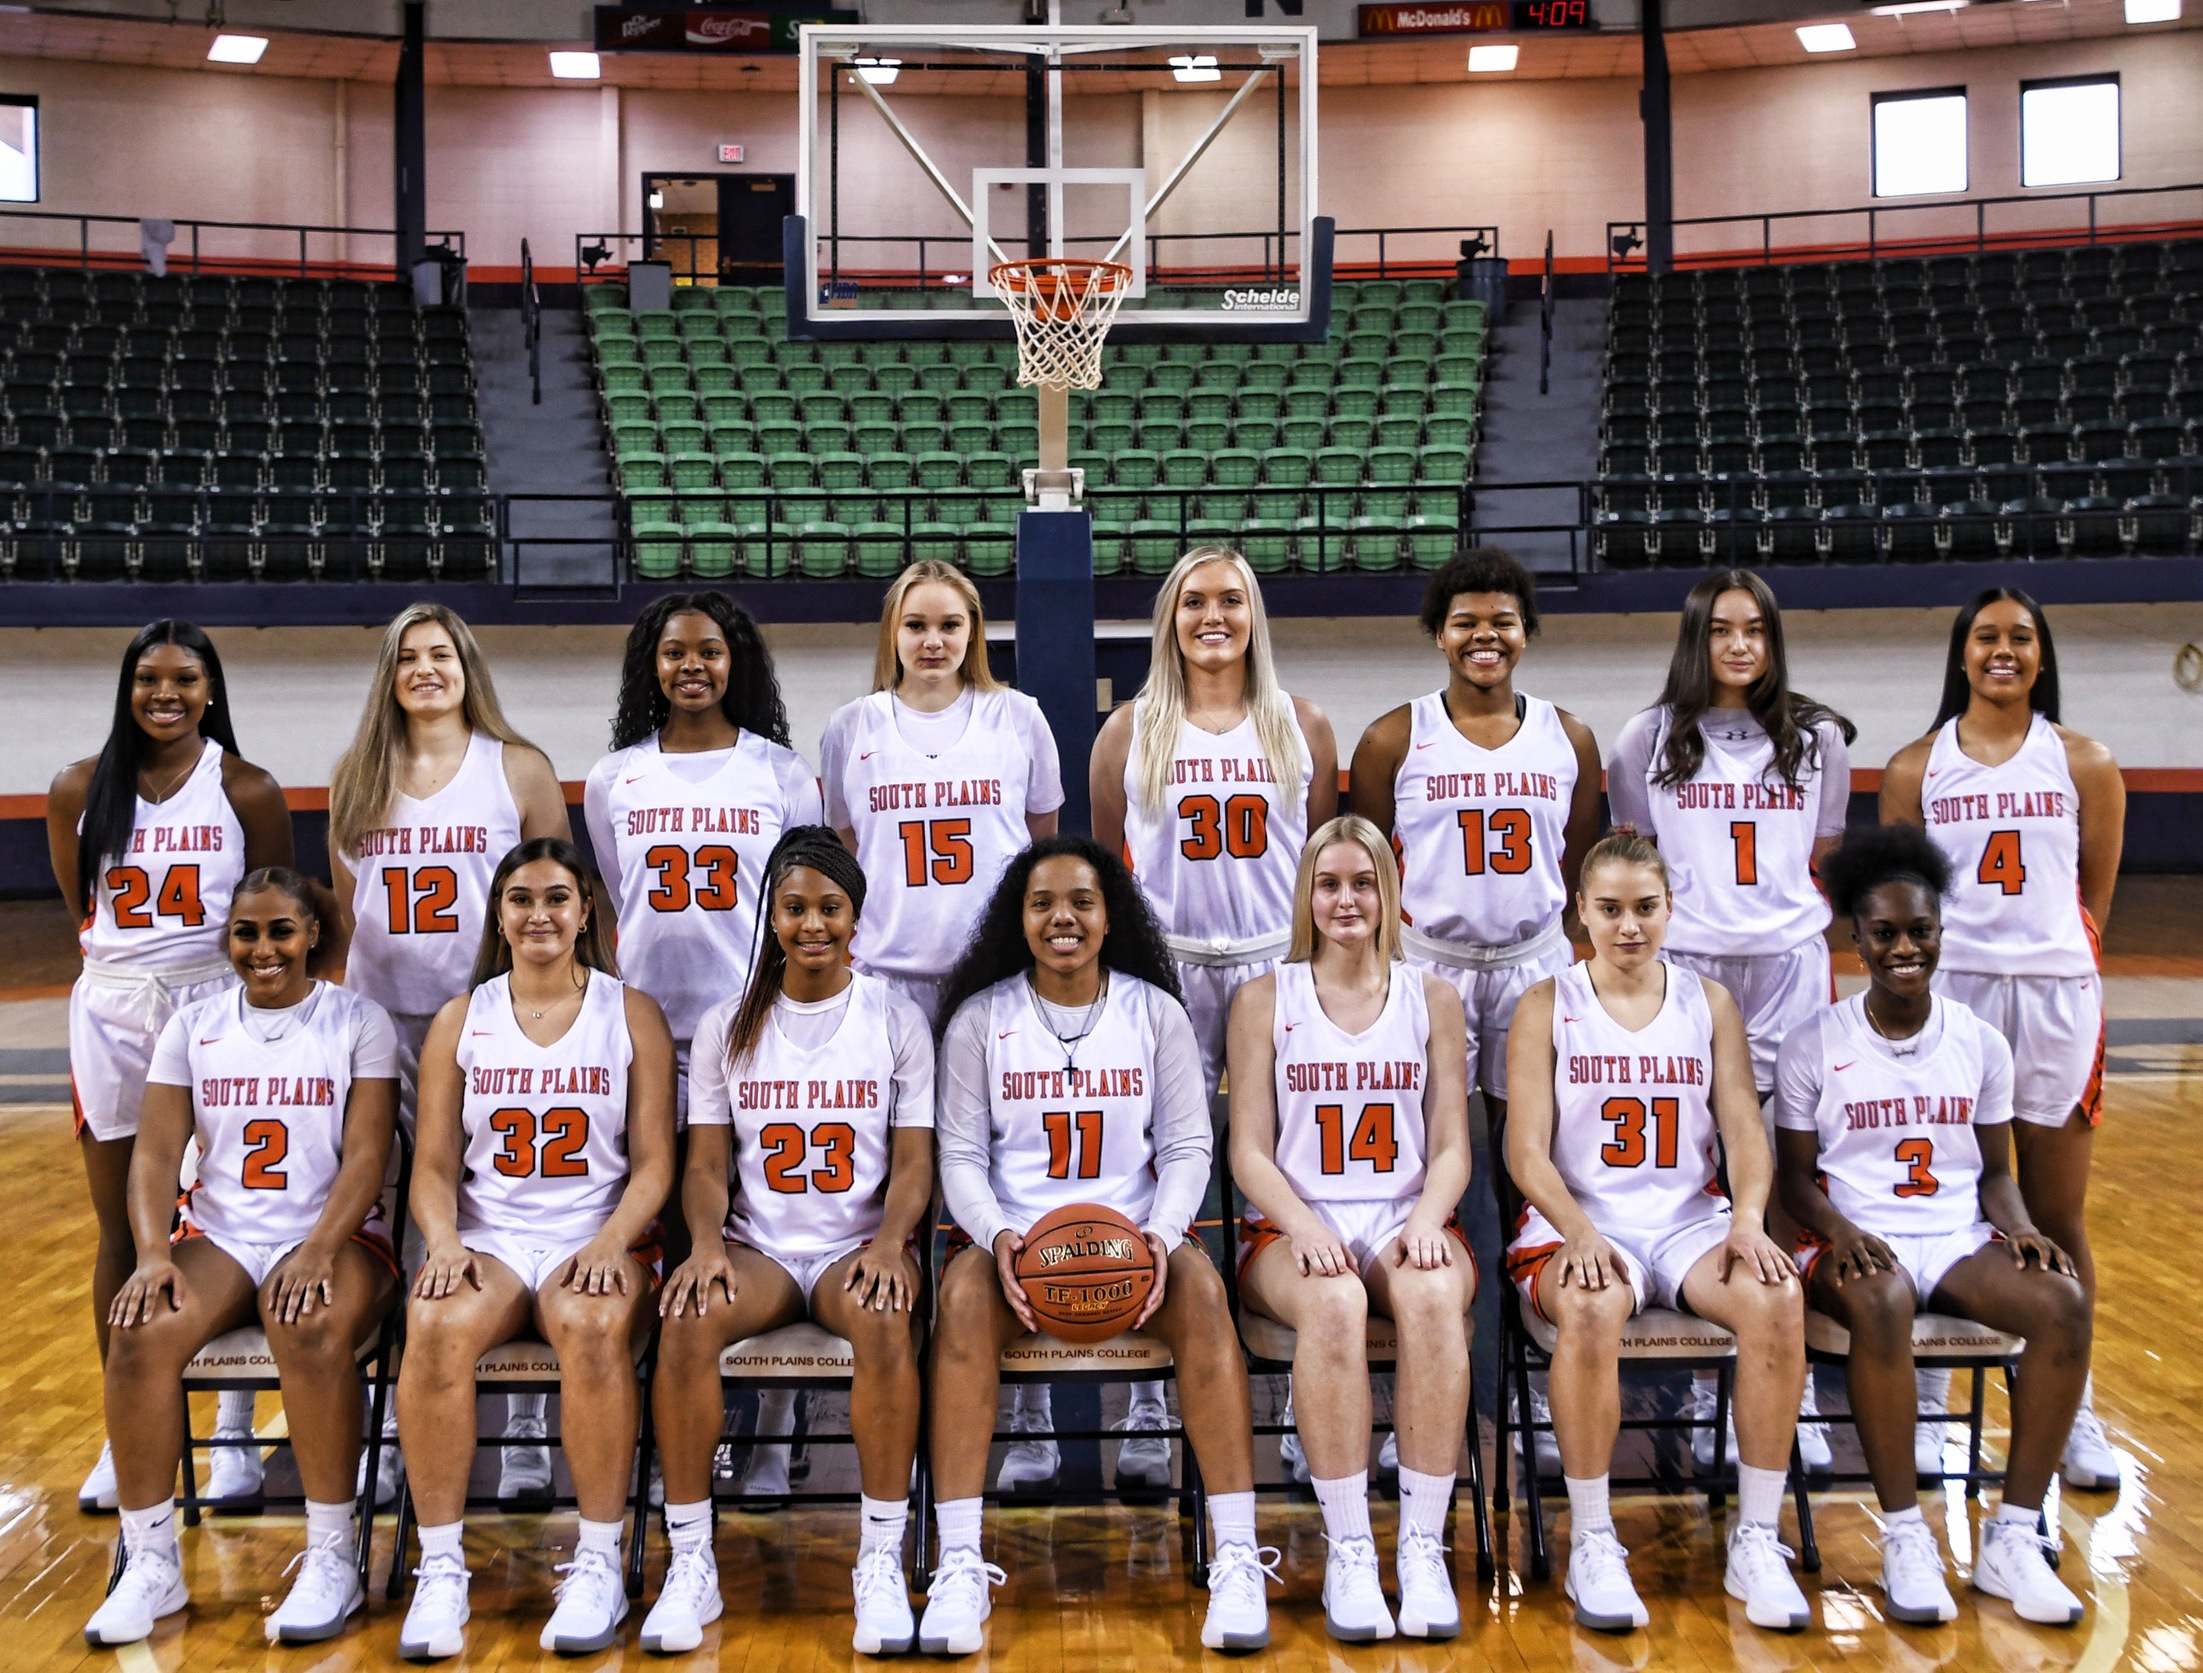 No. 5 Lady Texans defeat Frank Phillips 54-46 Monday to capture Western Junior College Athletic Conference title